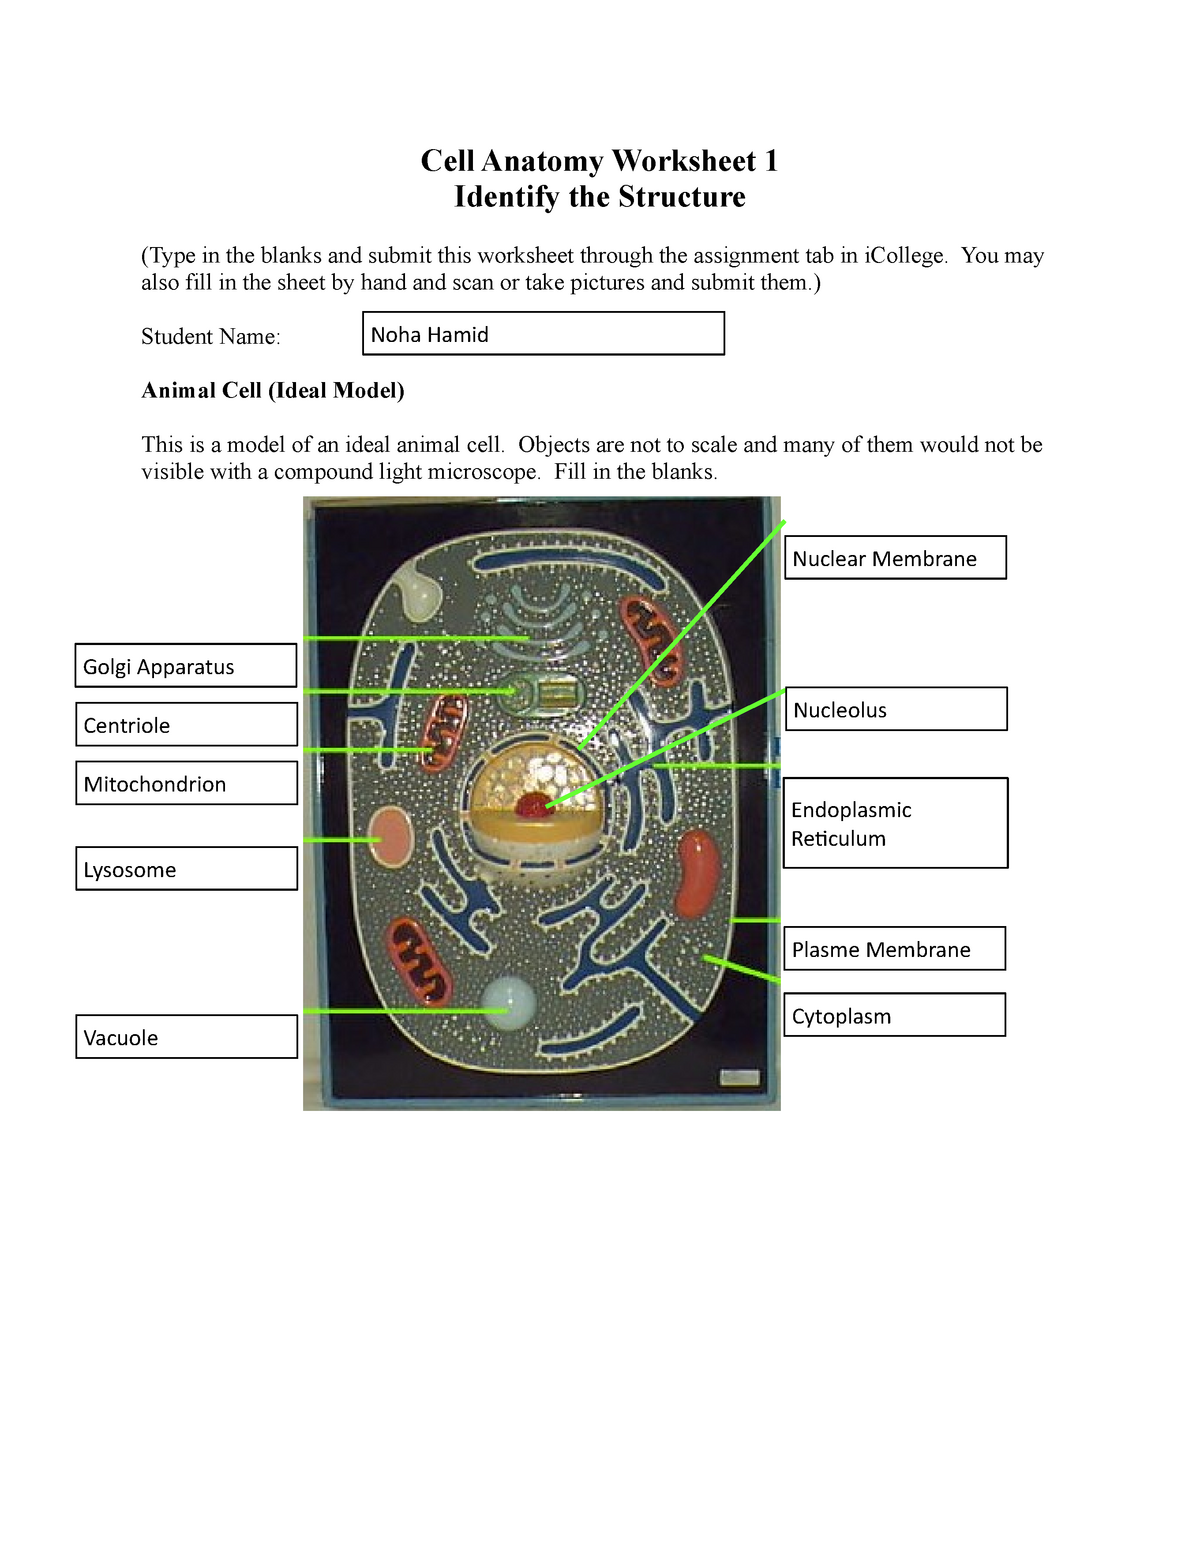 Cell Anatomy Worksheet 1 - You may also fill in the sheet by hand and scan  or take pictures and - Studocu